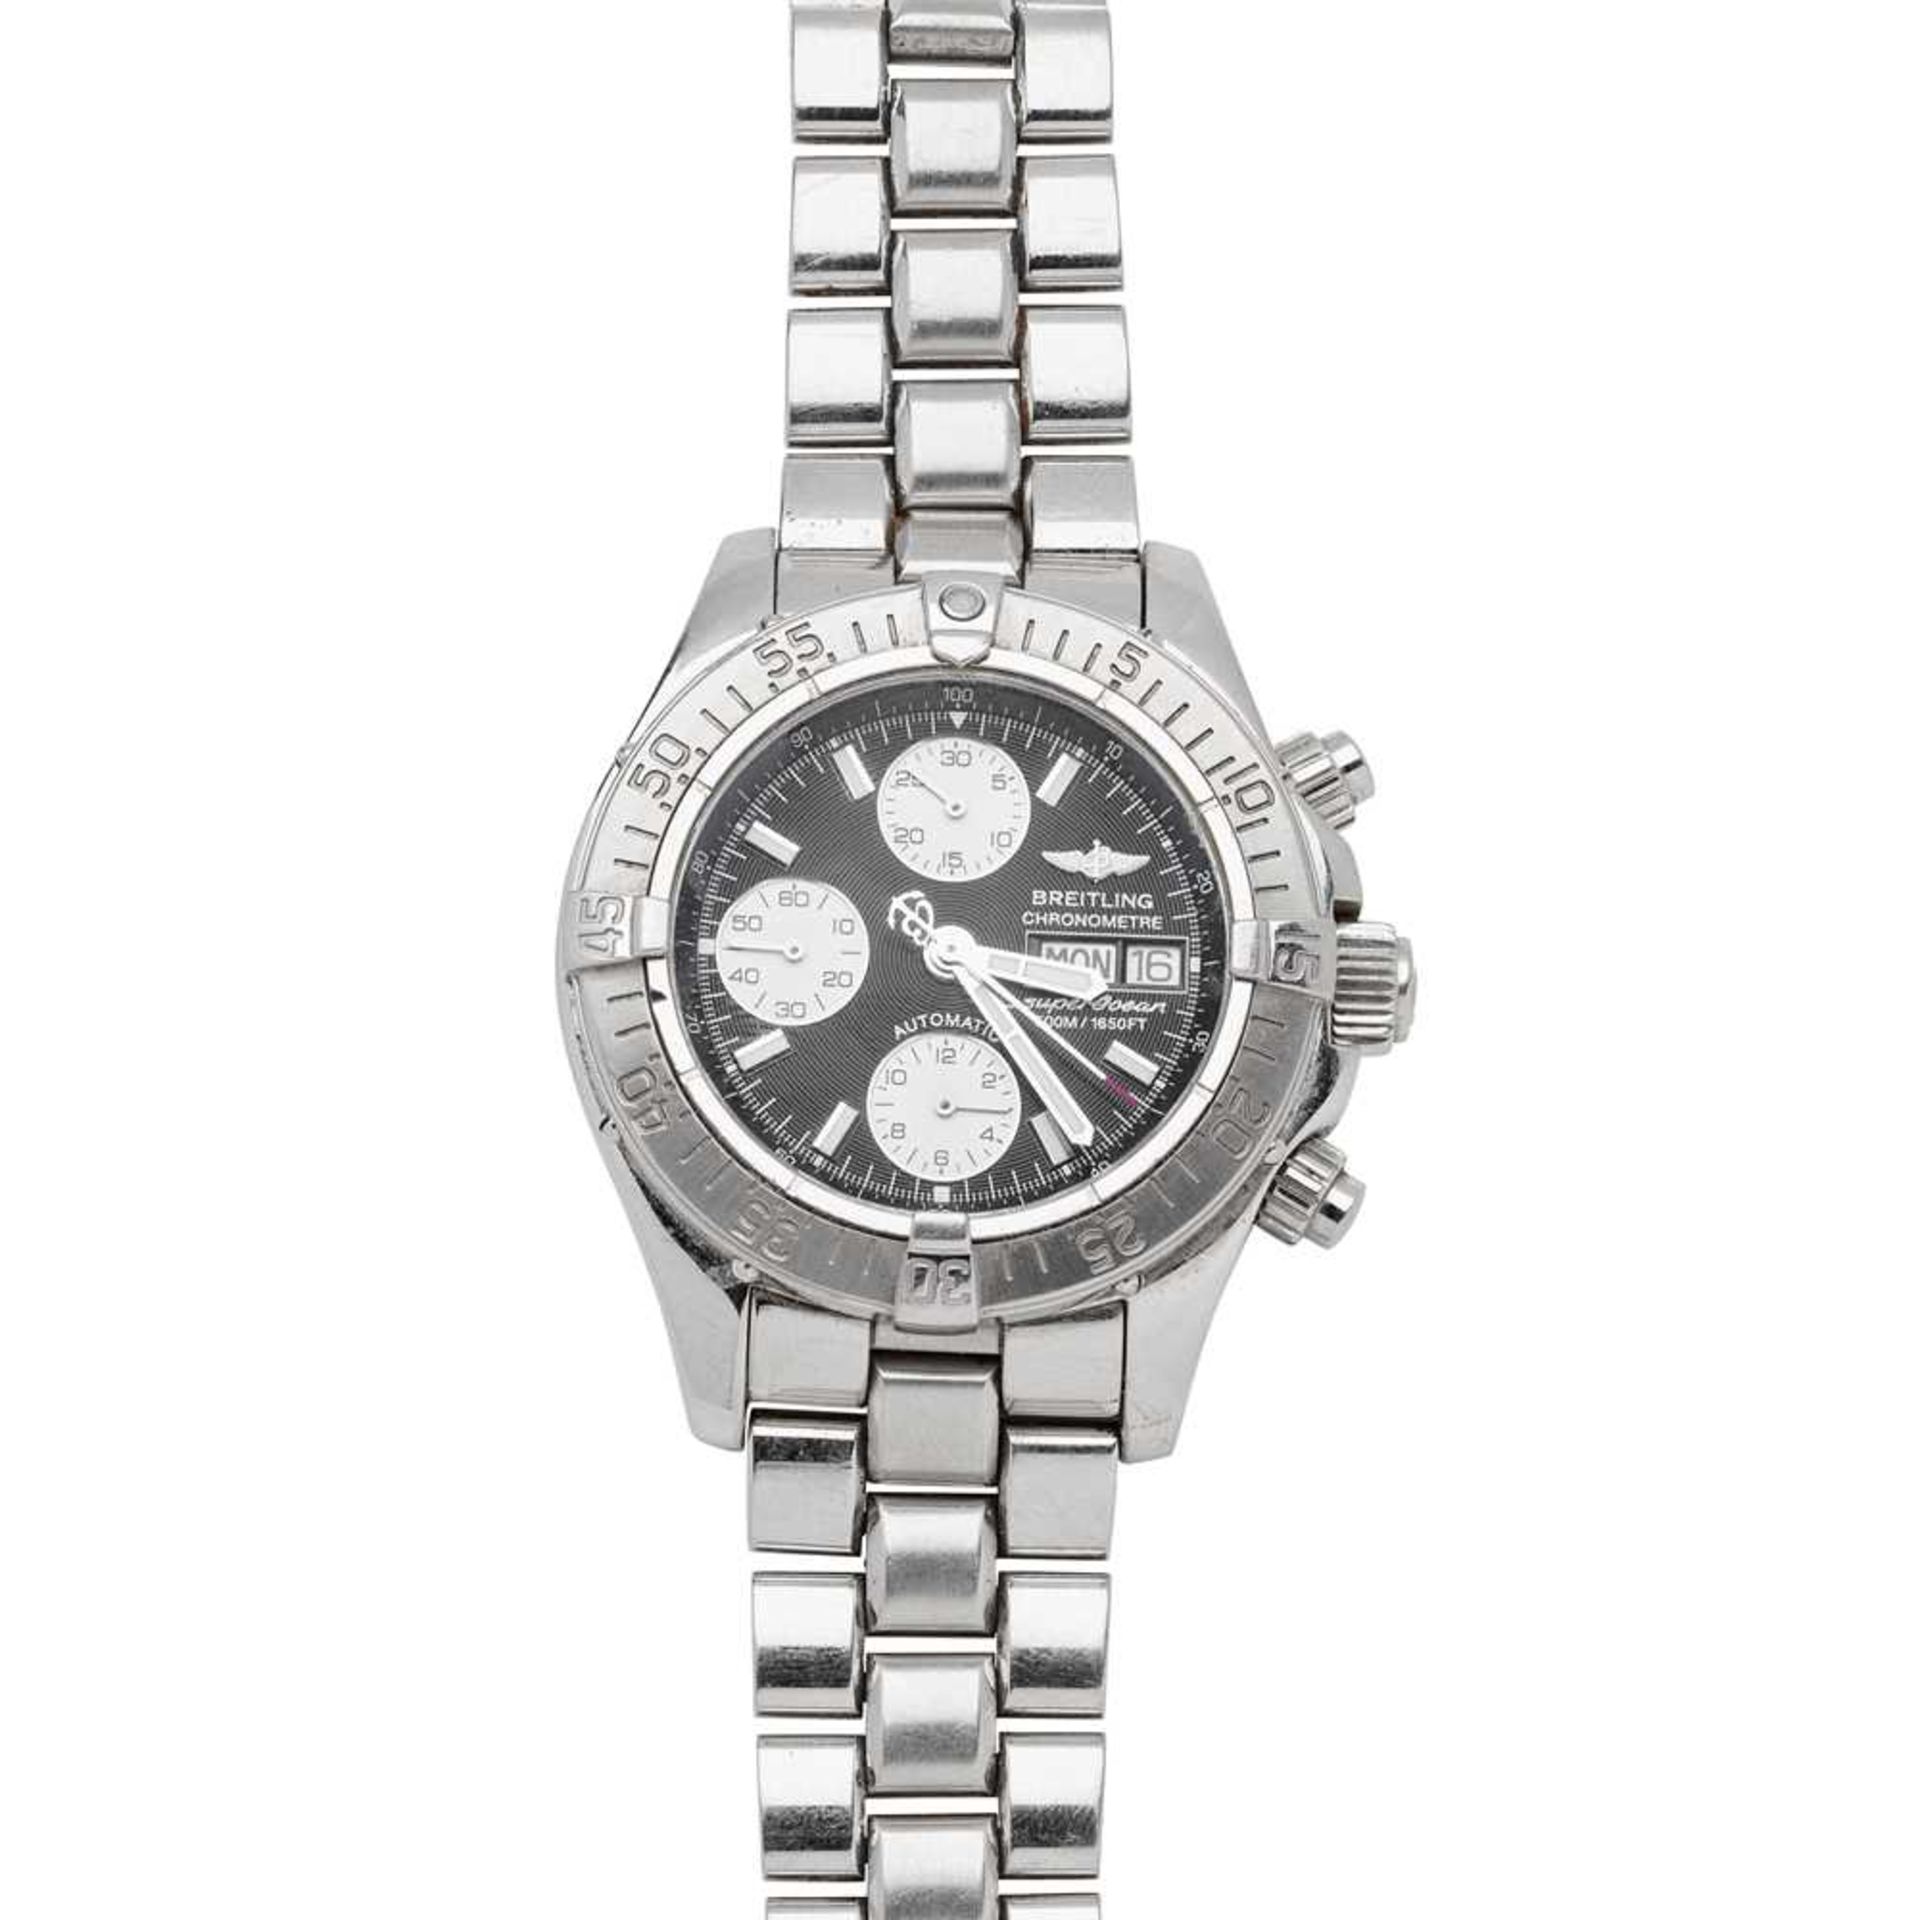 Breitling: a stainless steel chronograph wrist watch